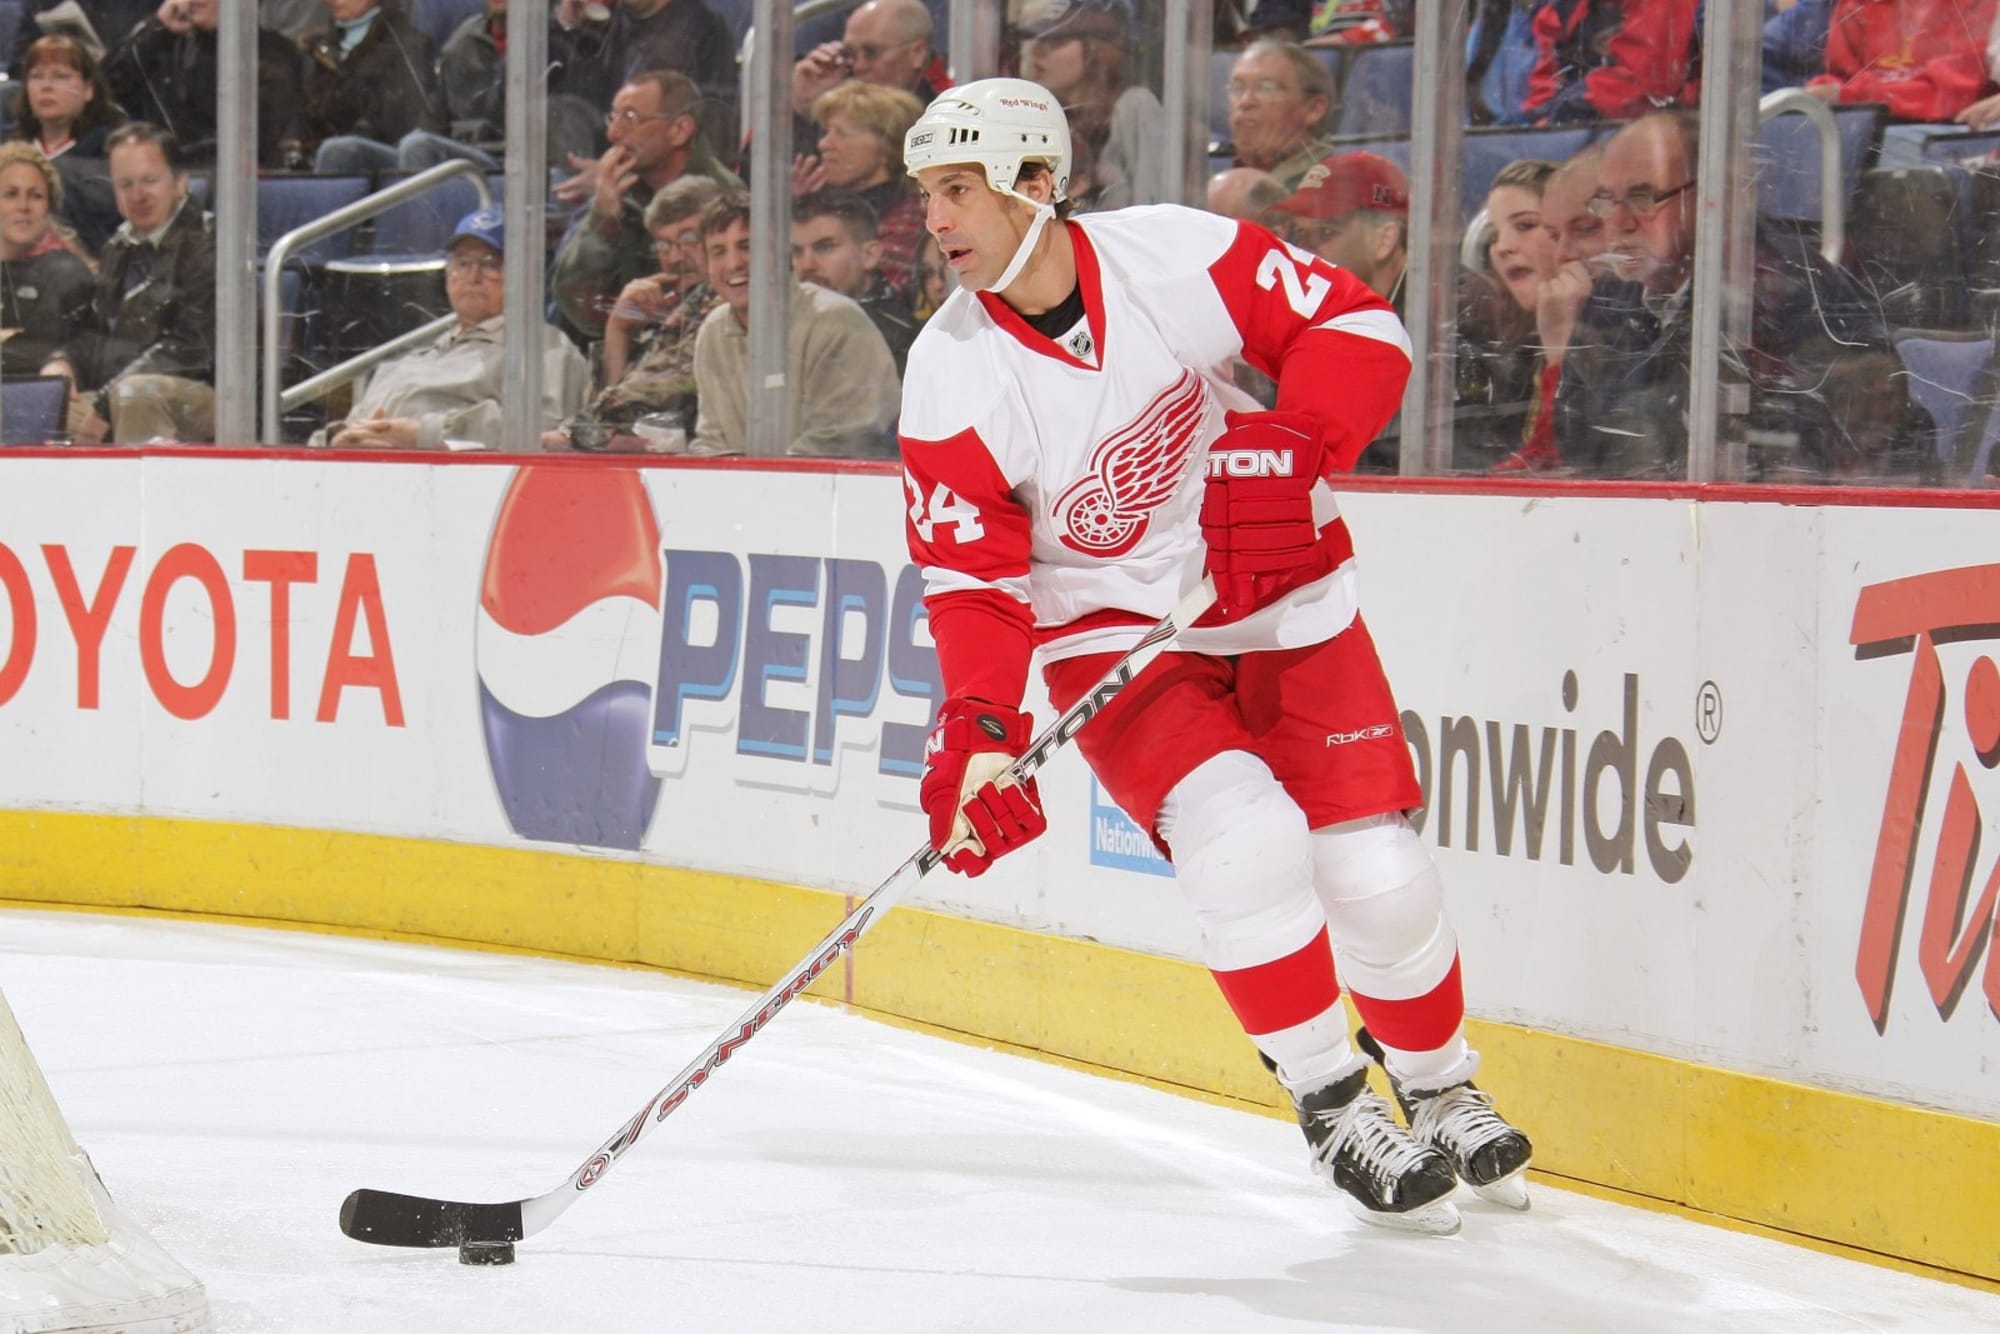 Chris Chelios: Inside his decision to leave Detroit Red Wings